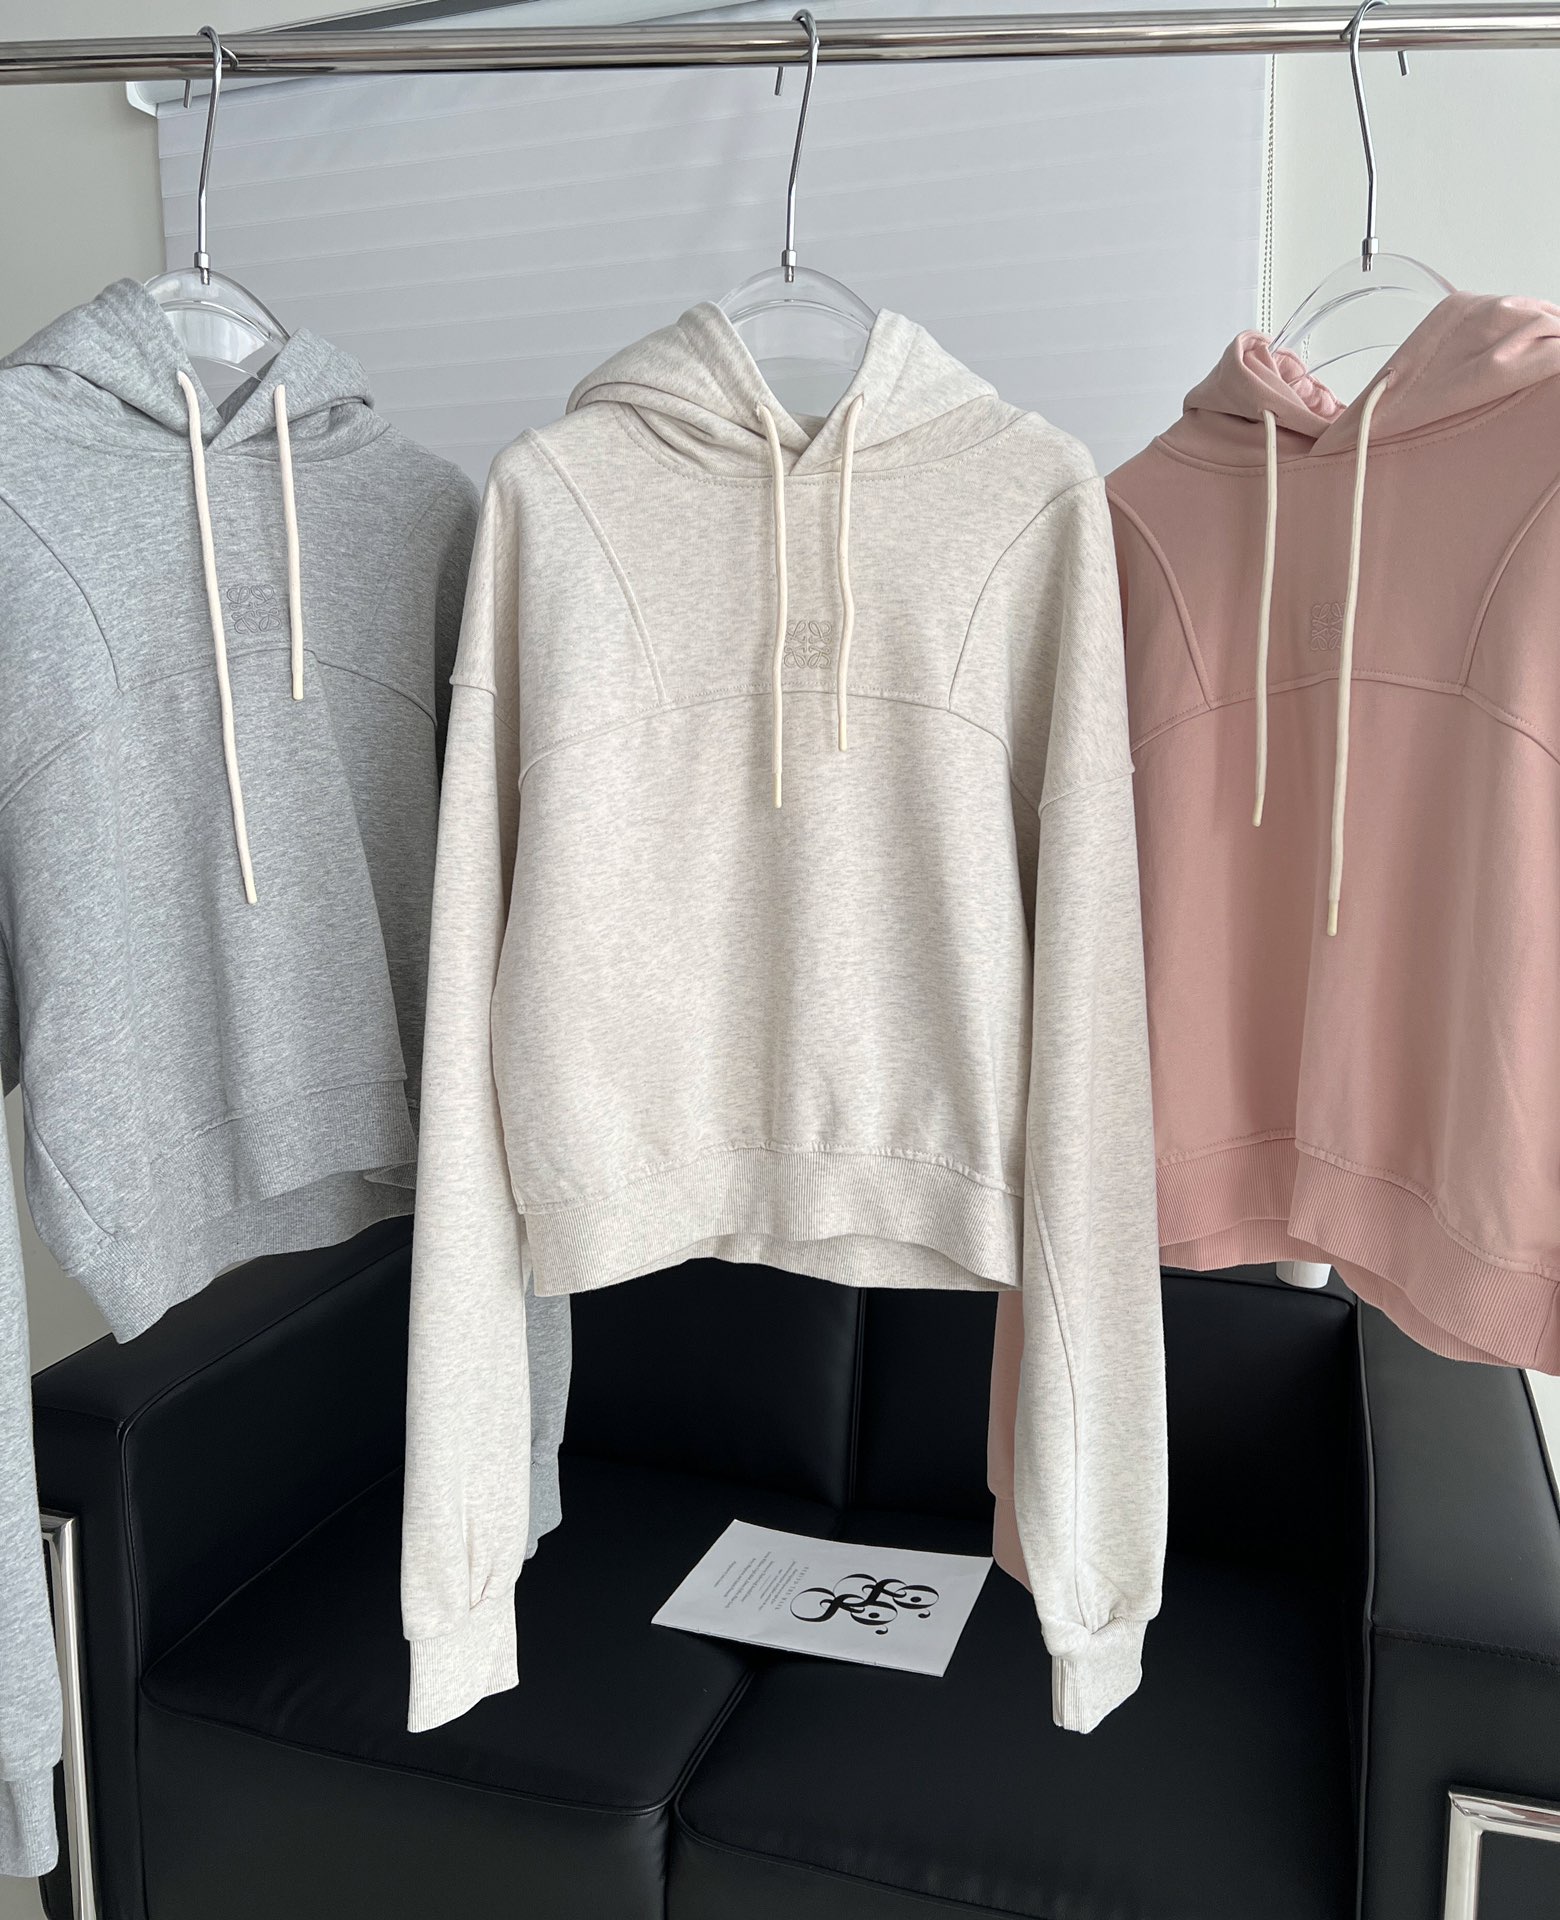 Loewe Clothing Sweatshirts Embroidery Fall Collection Hooded Top